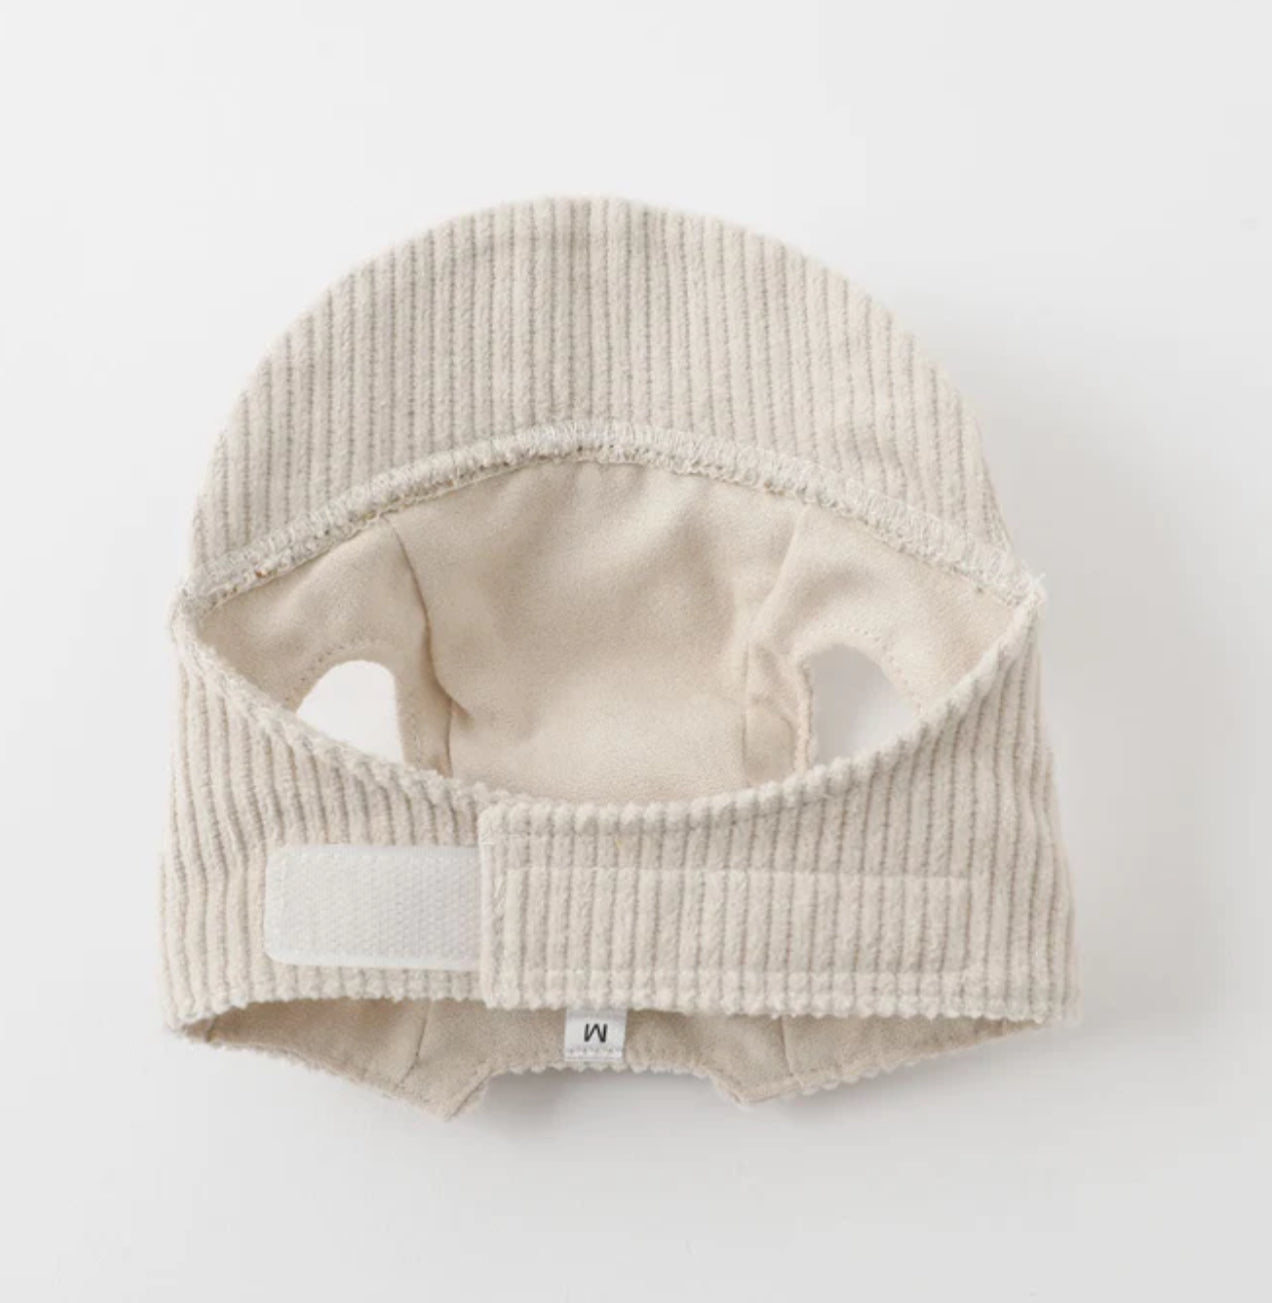 Bear Embroidered Corduroy Cap